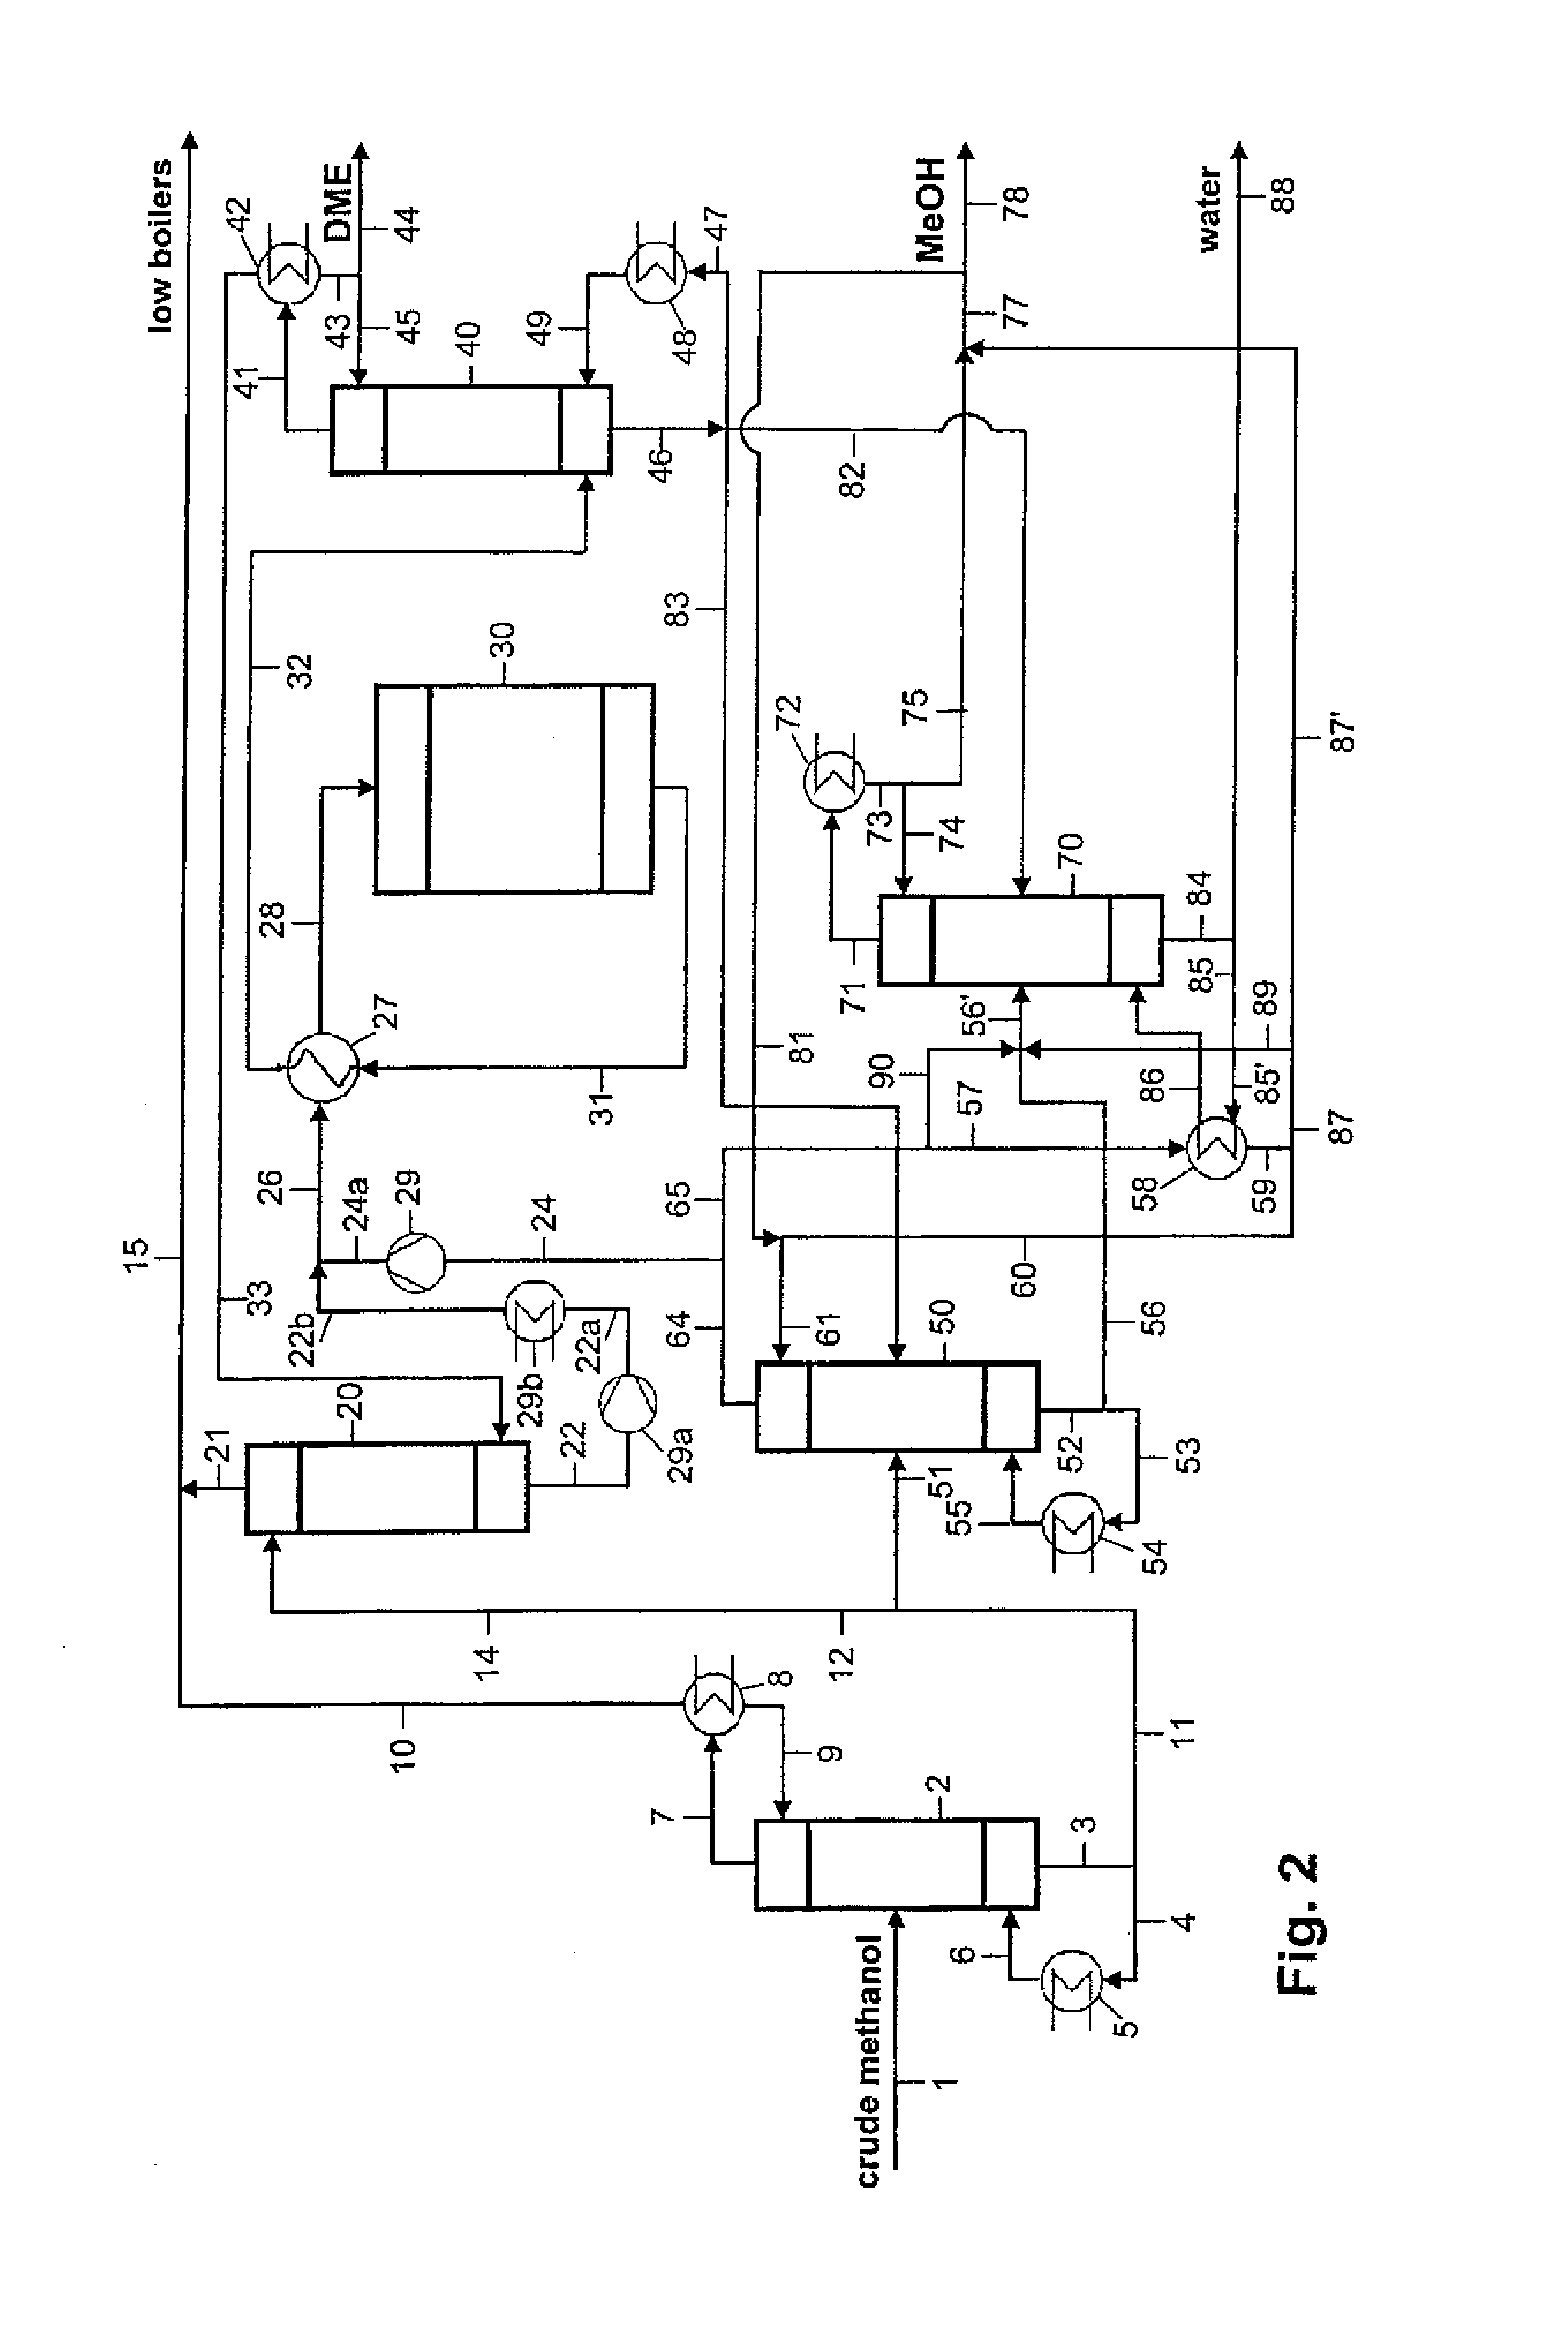 Method and system for producing methanol and dimethyl ether